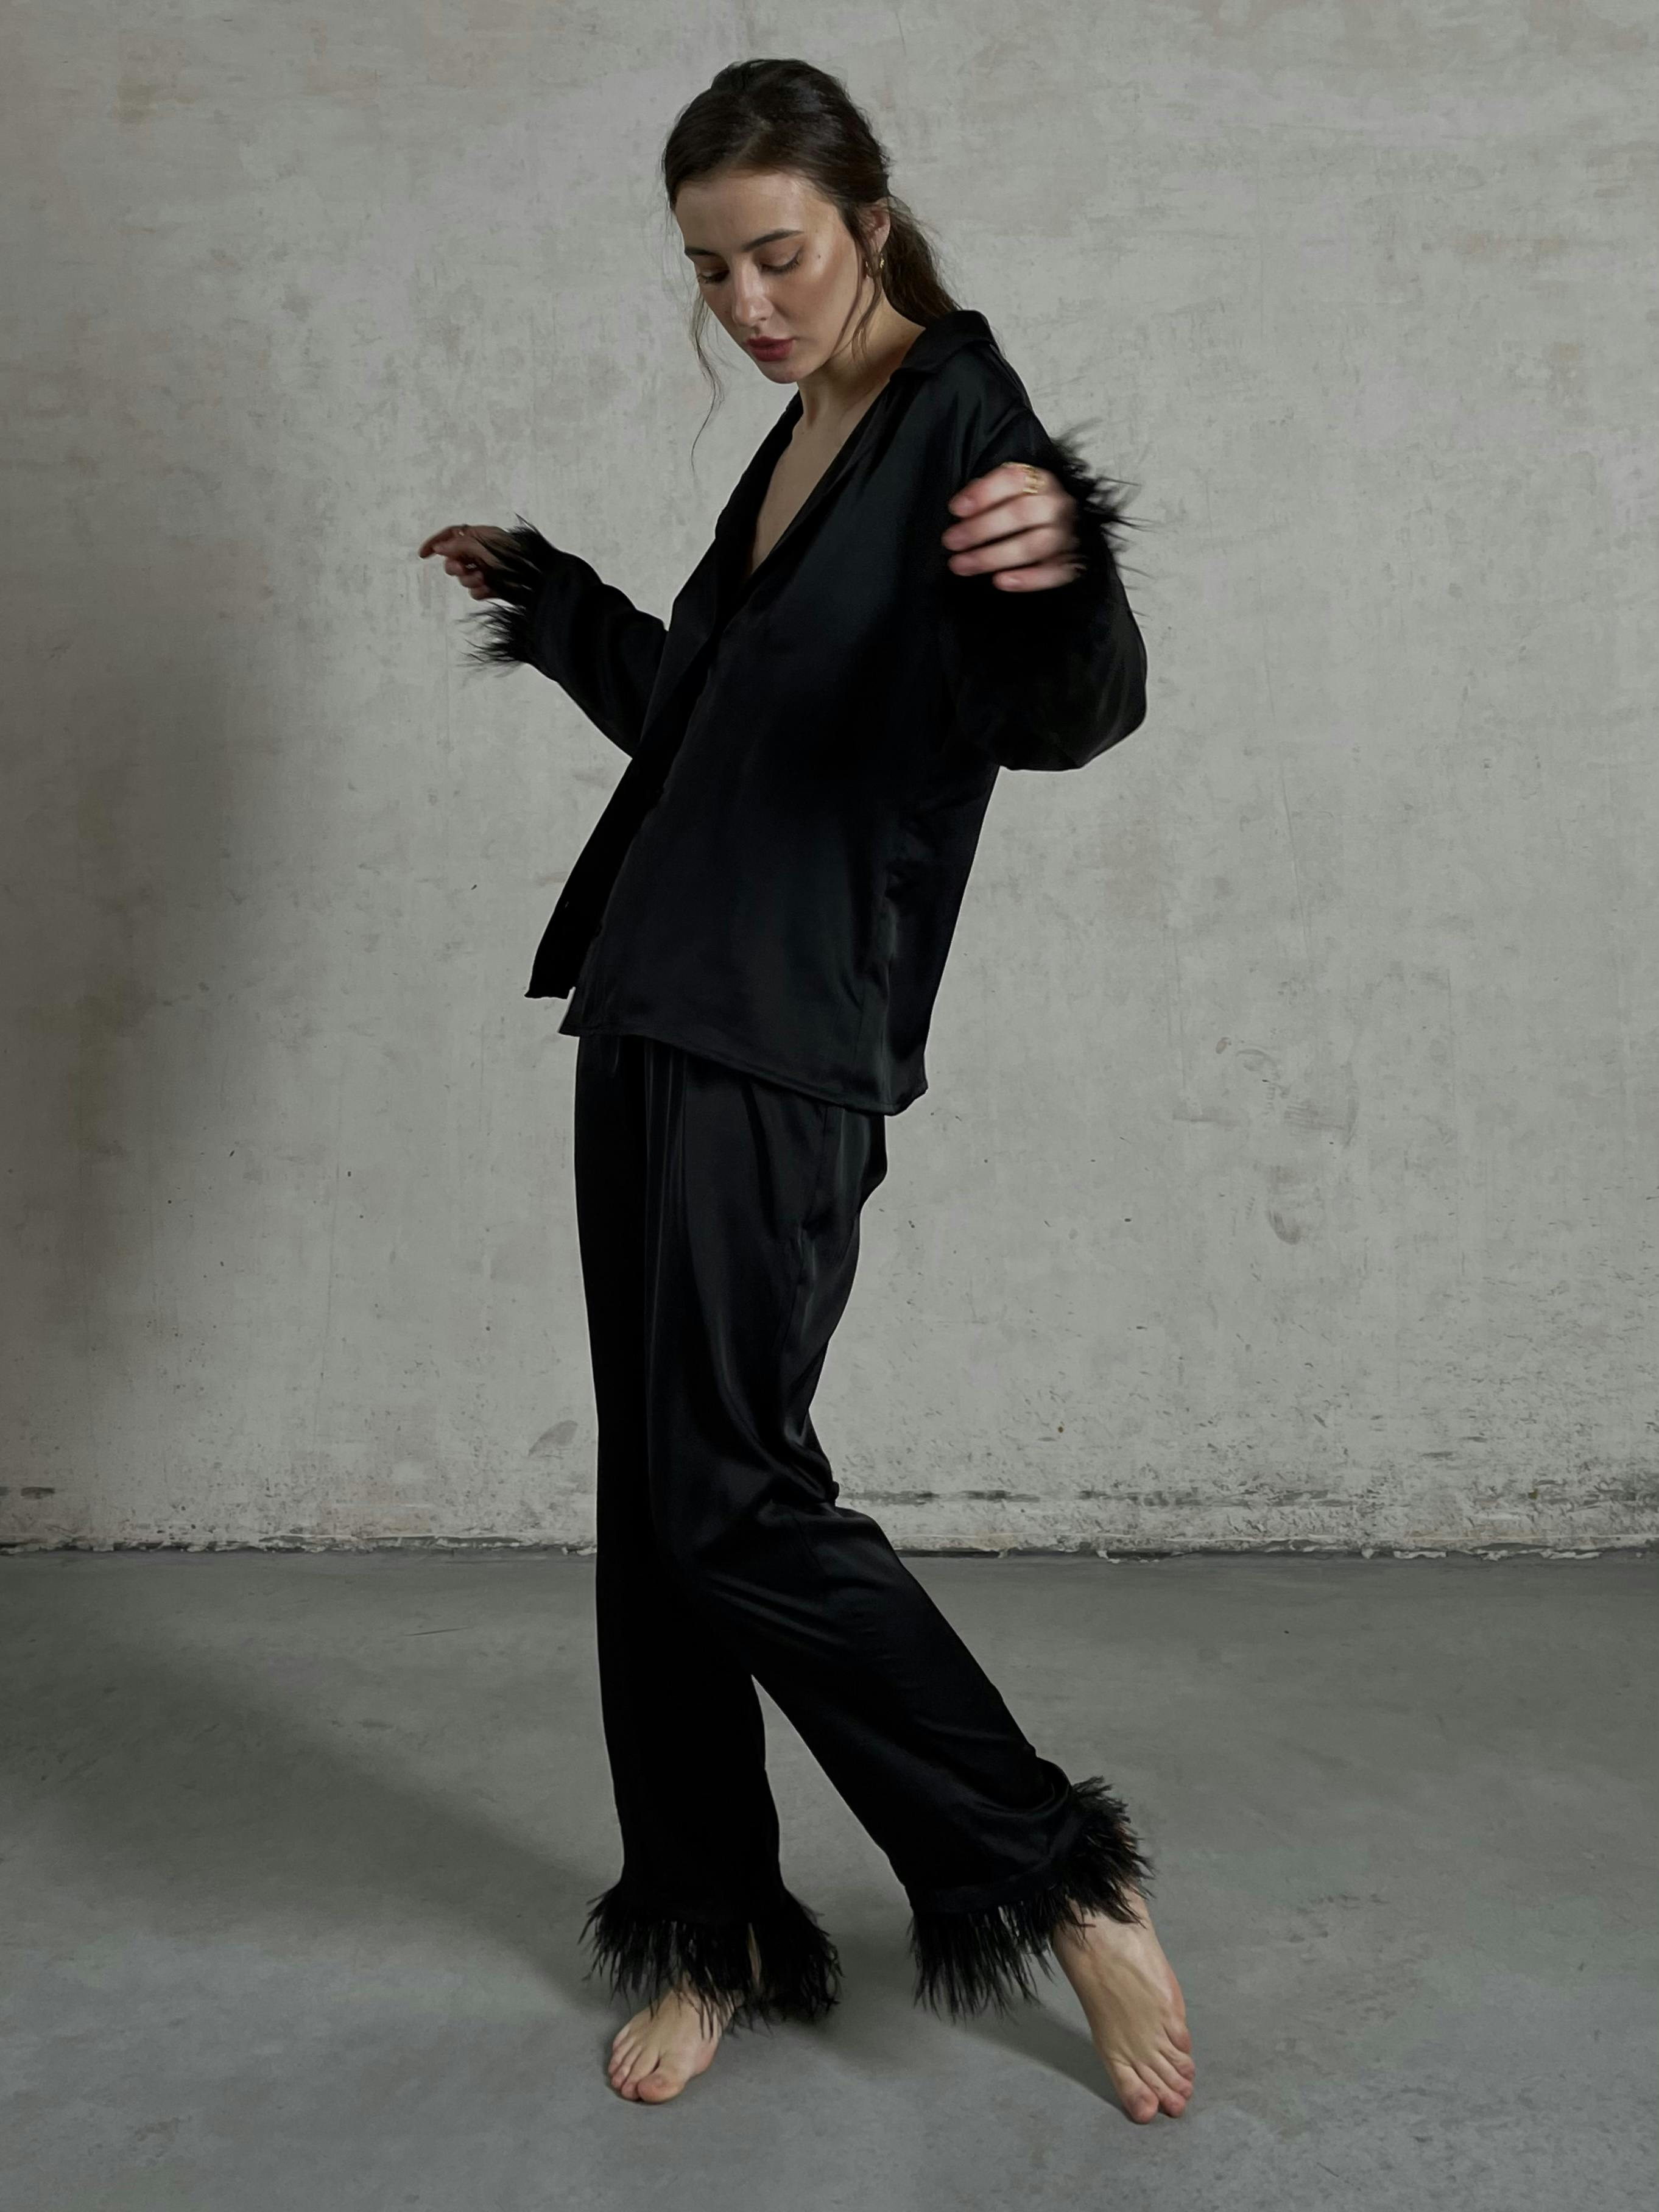 Black Silky Pajama Suit With Feathers, a product by Okiya Studio